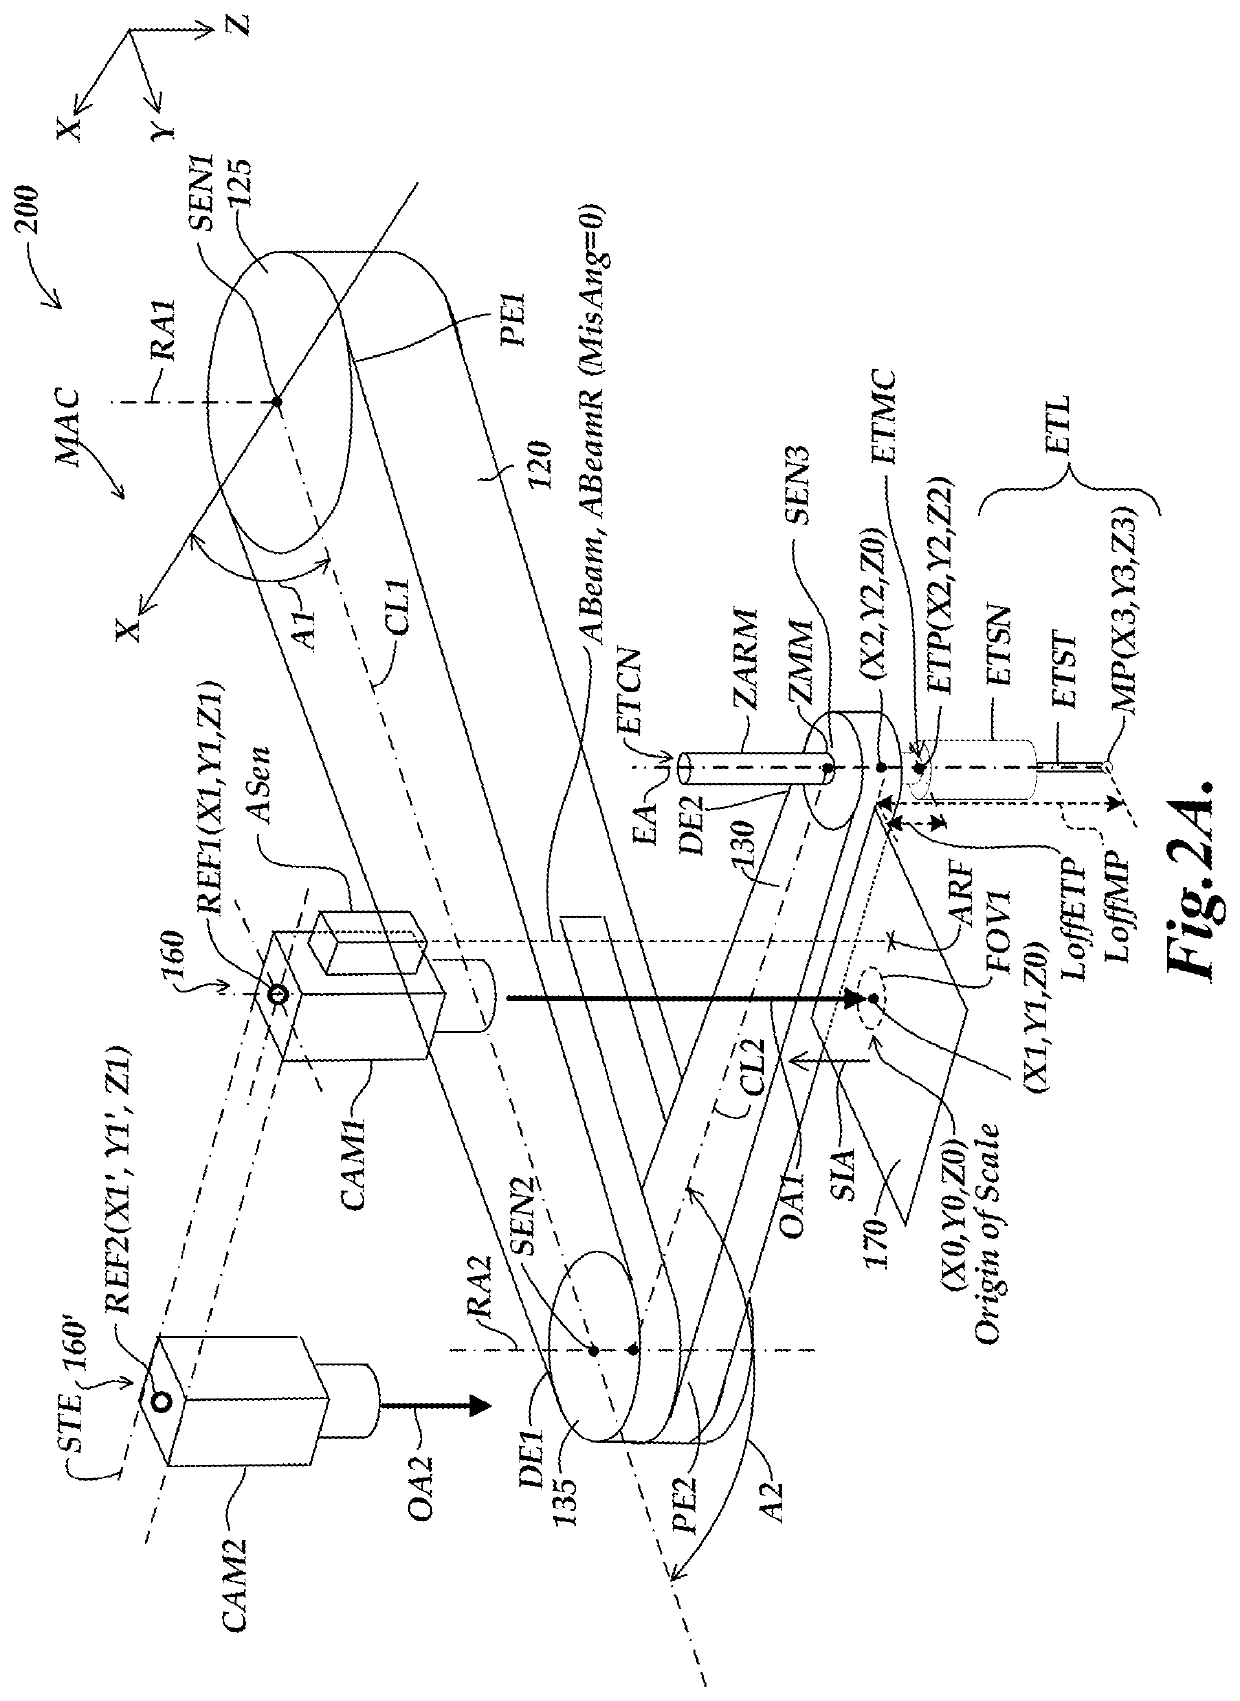 Supplementary metrology position coordinates determination system including an alignment sensor for use with a robot